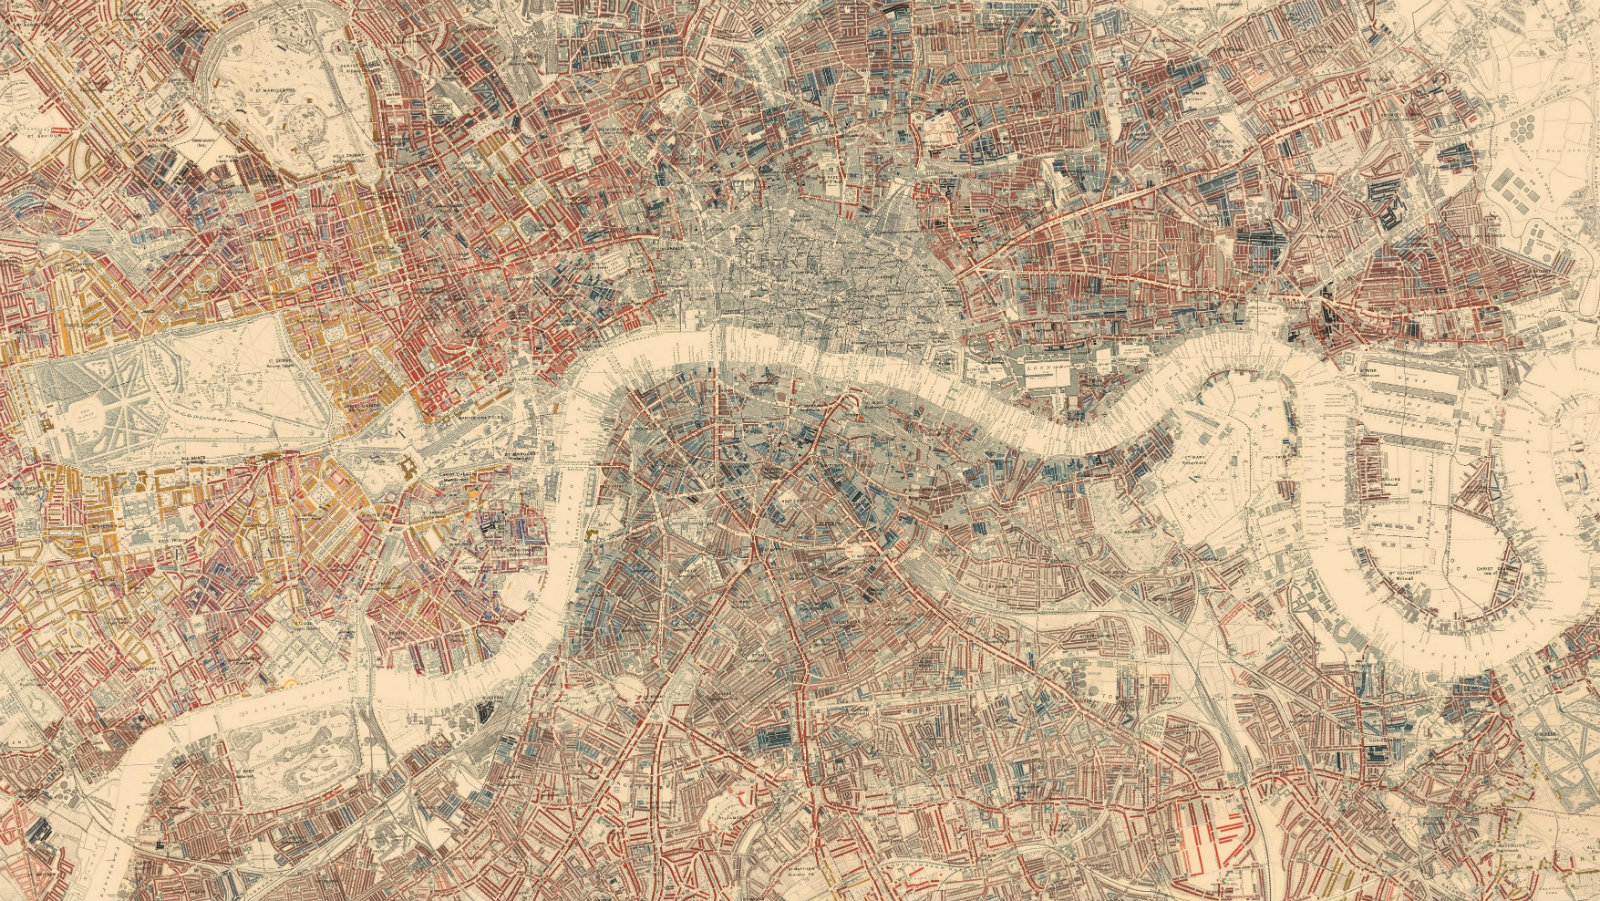 A colourful overhead map of London created by Charles Booth. The Thames is clearly visible. The various colours represent levels of social class as classified by the original researchers.